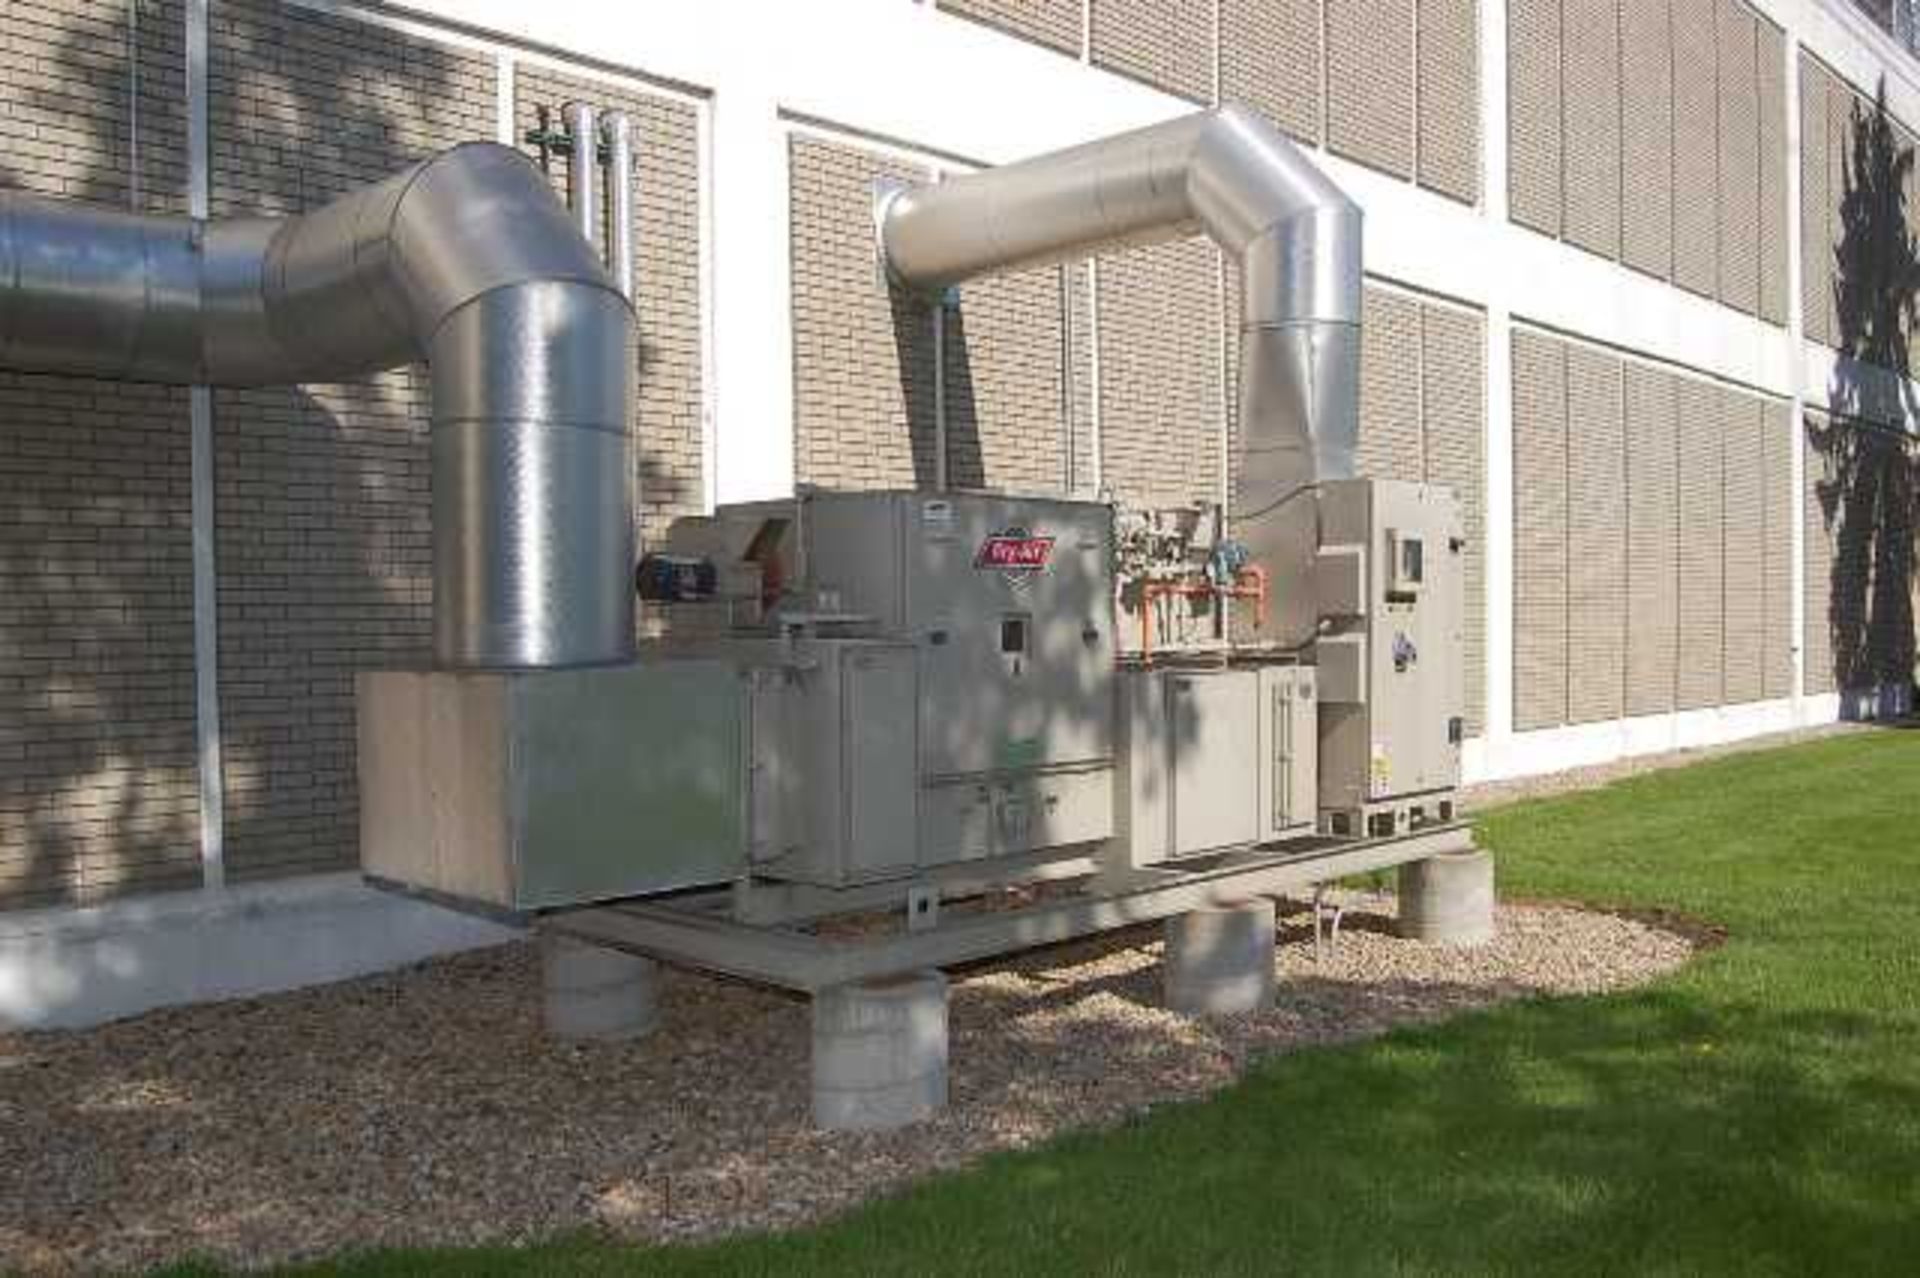 Bry Air Chill Water/Natural Gas Dehumidification System, Model #VFB-ELL-24-G4-2500CWA, SN 2013G9573 - Image 4 of 4